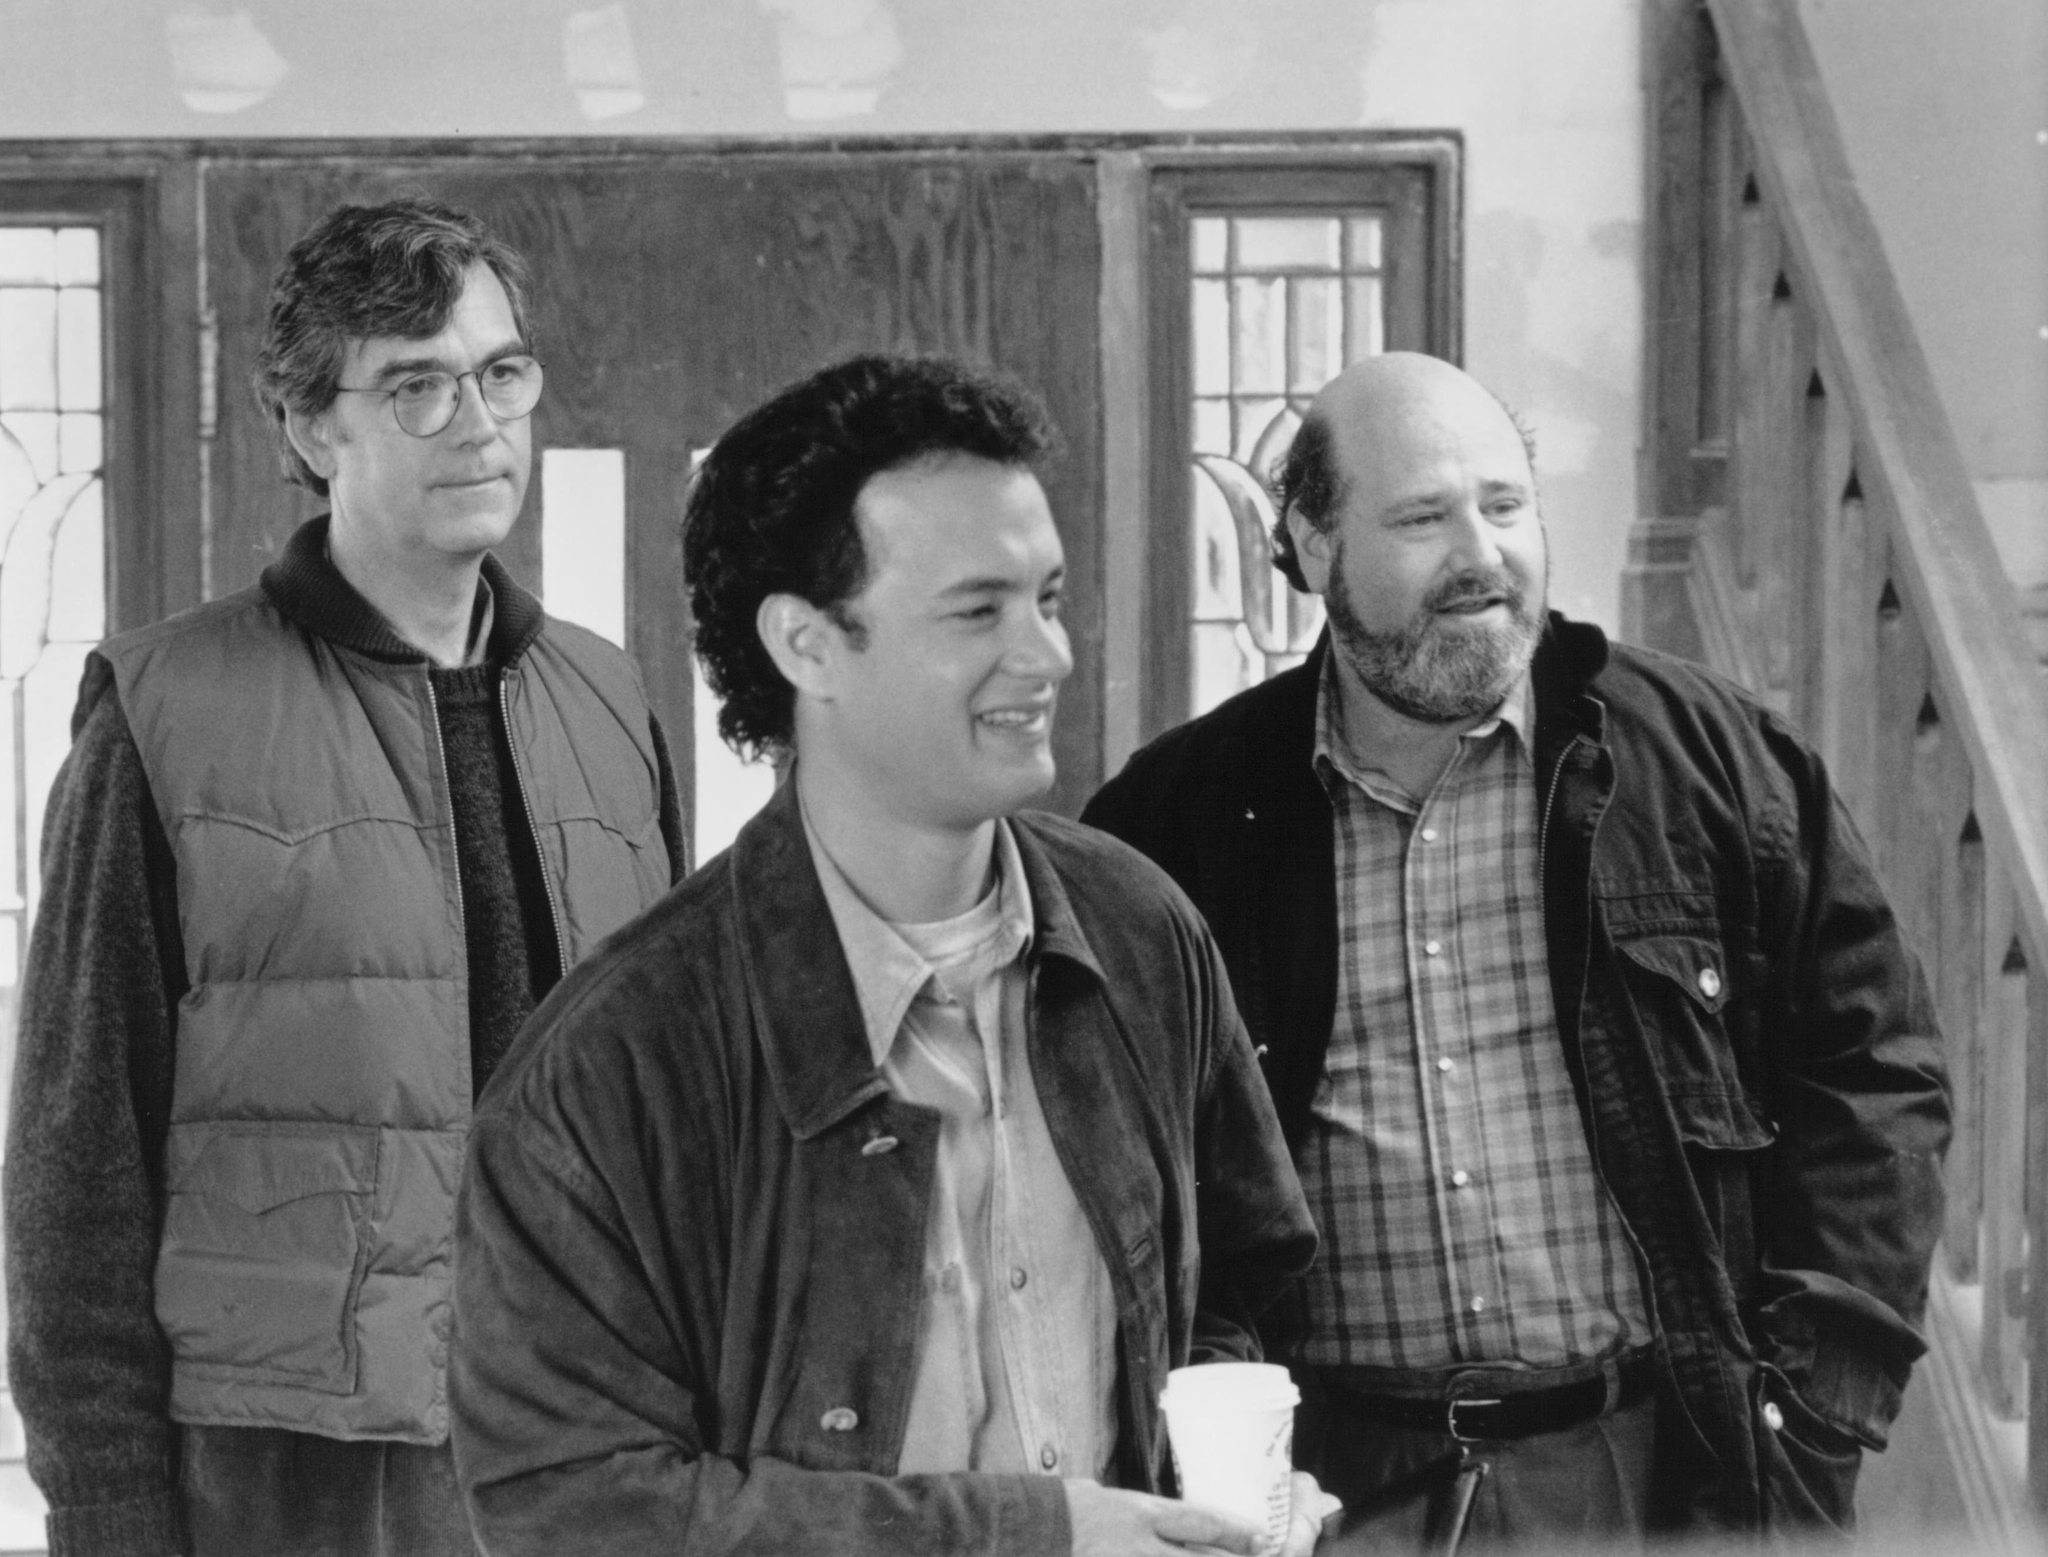 Still of Tom Hanks and Rob Reiner in Sleepless in Seattle (1993)